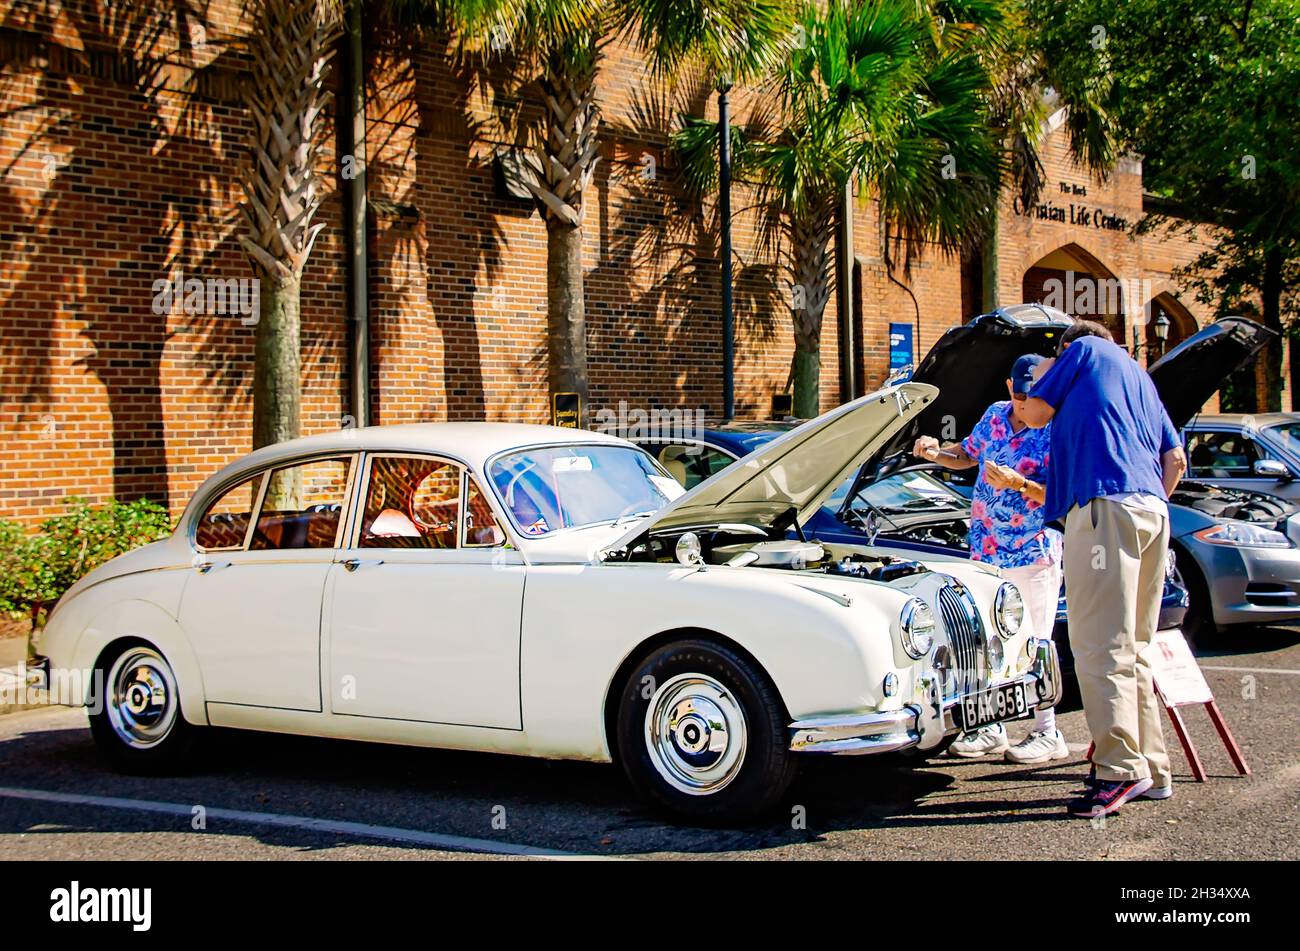 Car enthusiasts inspect a 1967 Jaguar Mark II at the 31st annual British Car Festival, Oct. 24, 2021, in Fairhope, Alabama. Stock Photo